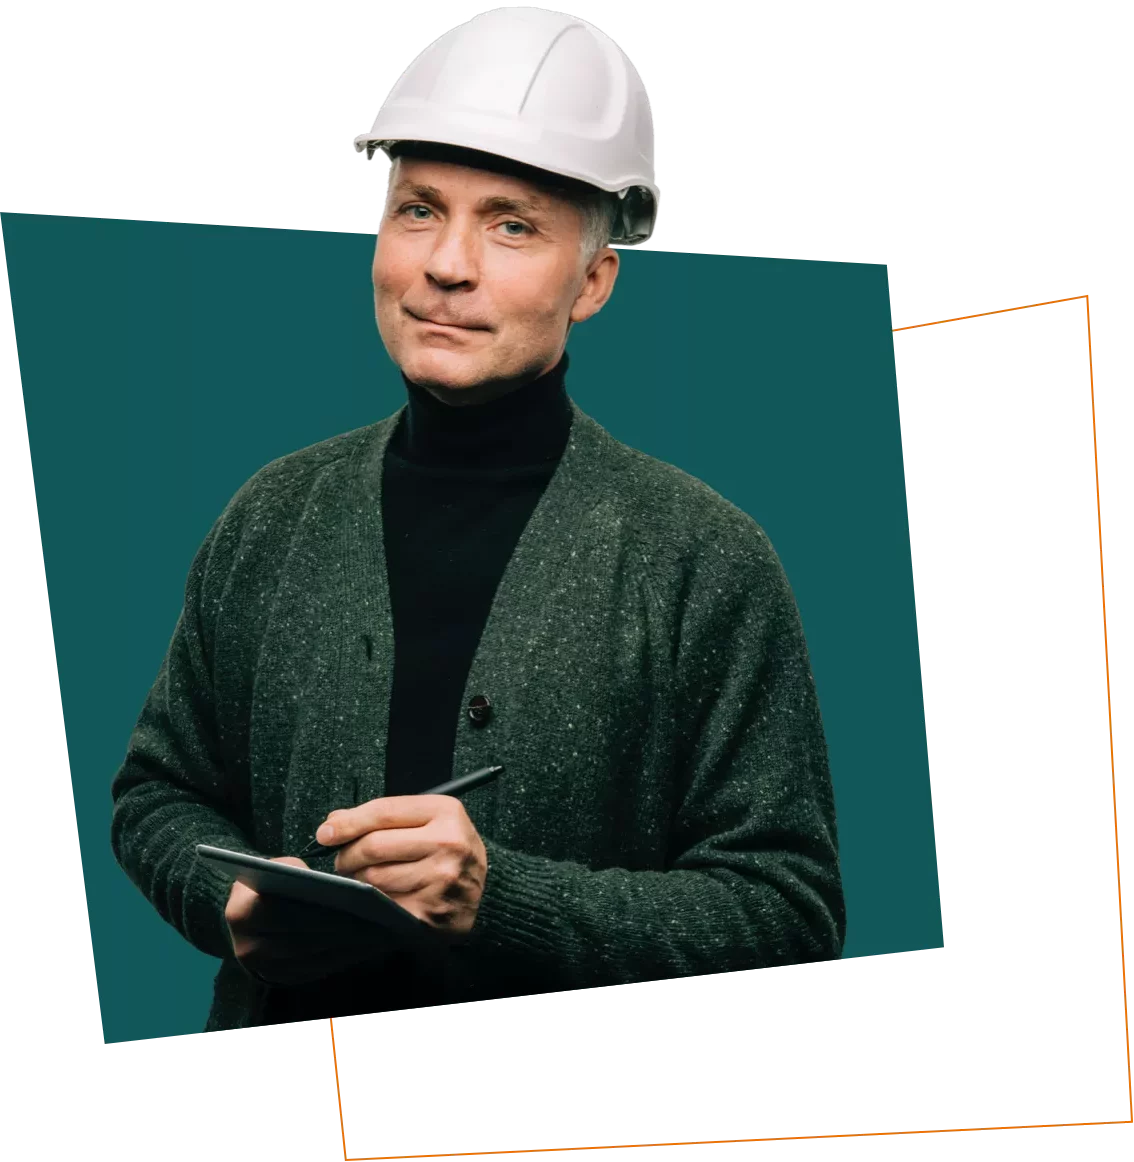 Auditor with safety helmet and tablet